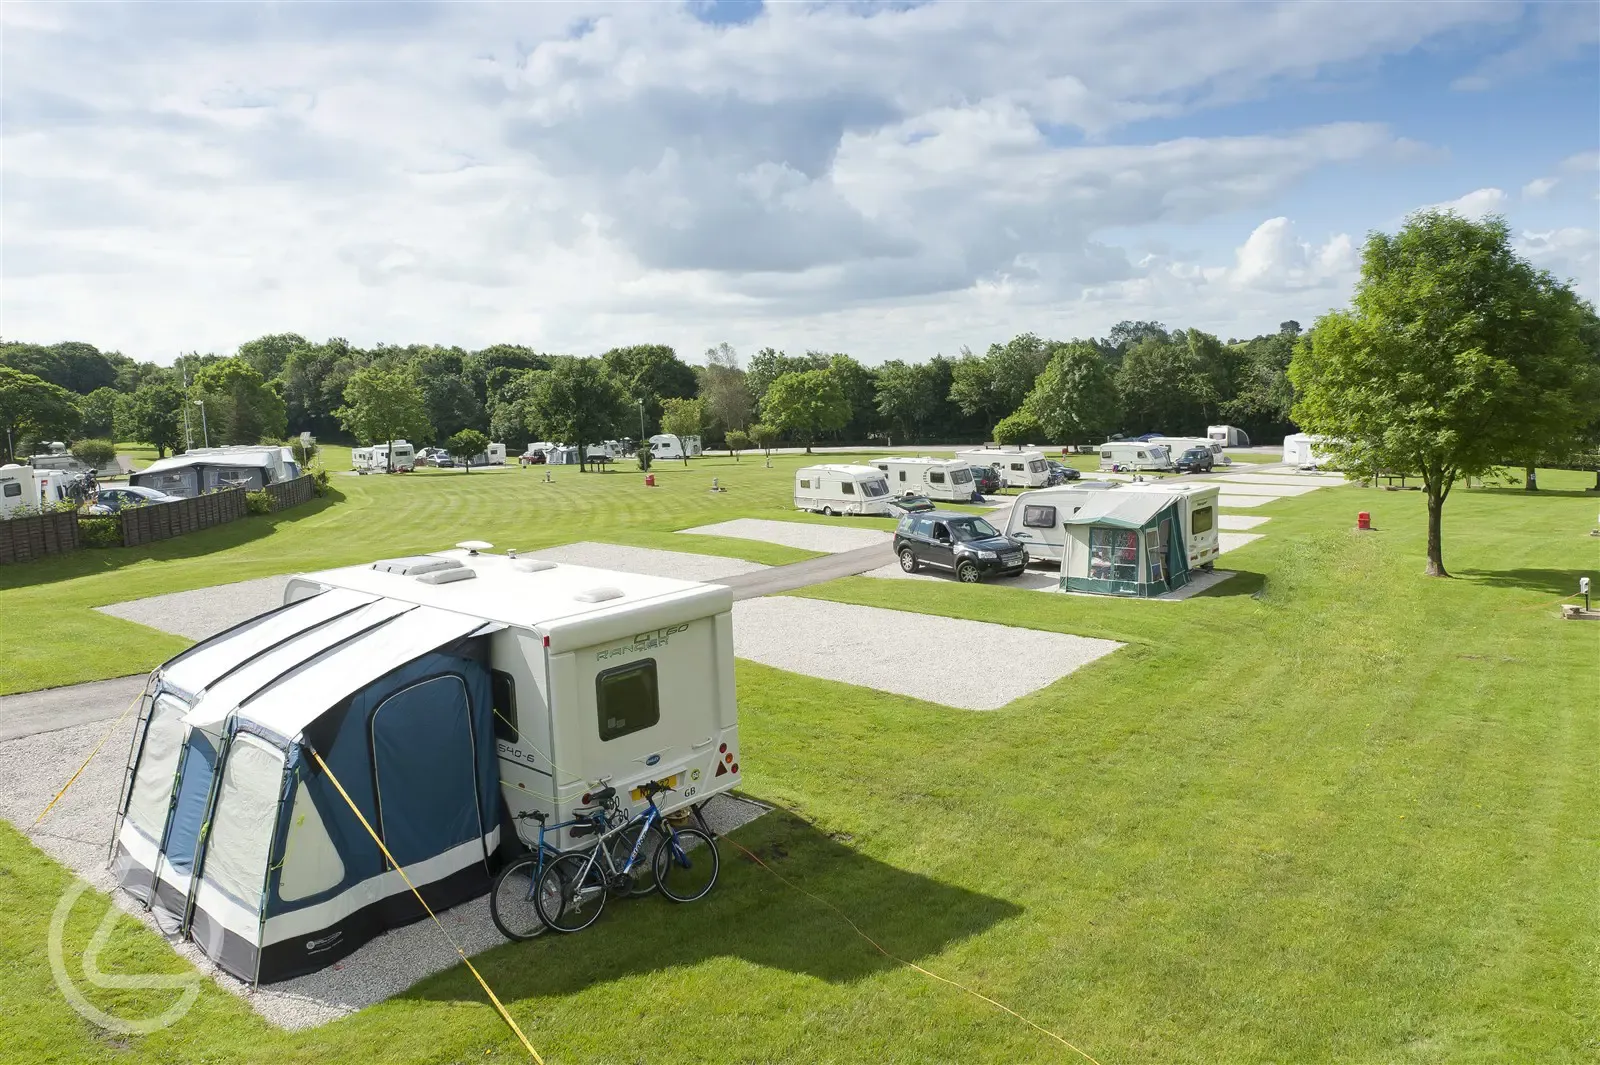 View of Caravans, Motorhomes and Tents at Alton the Star Club Campsite